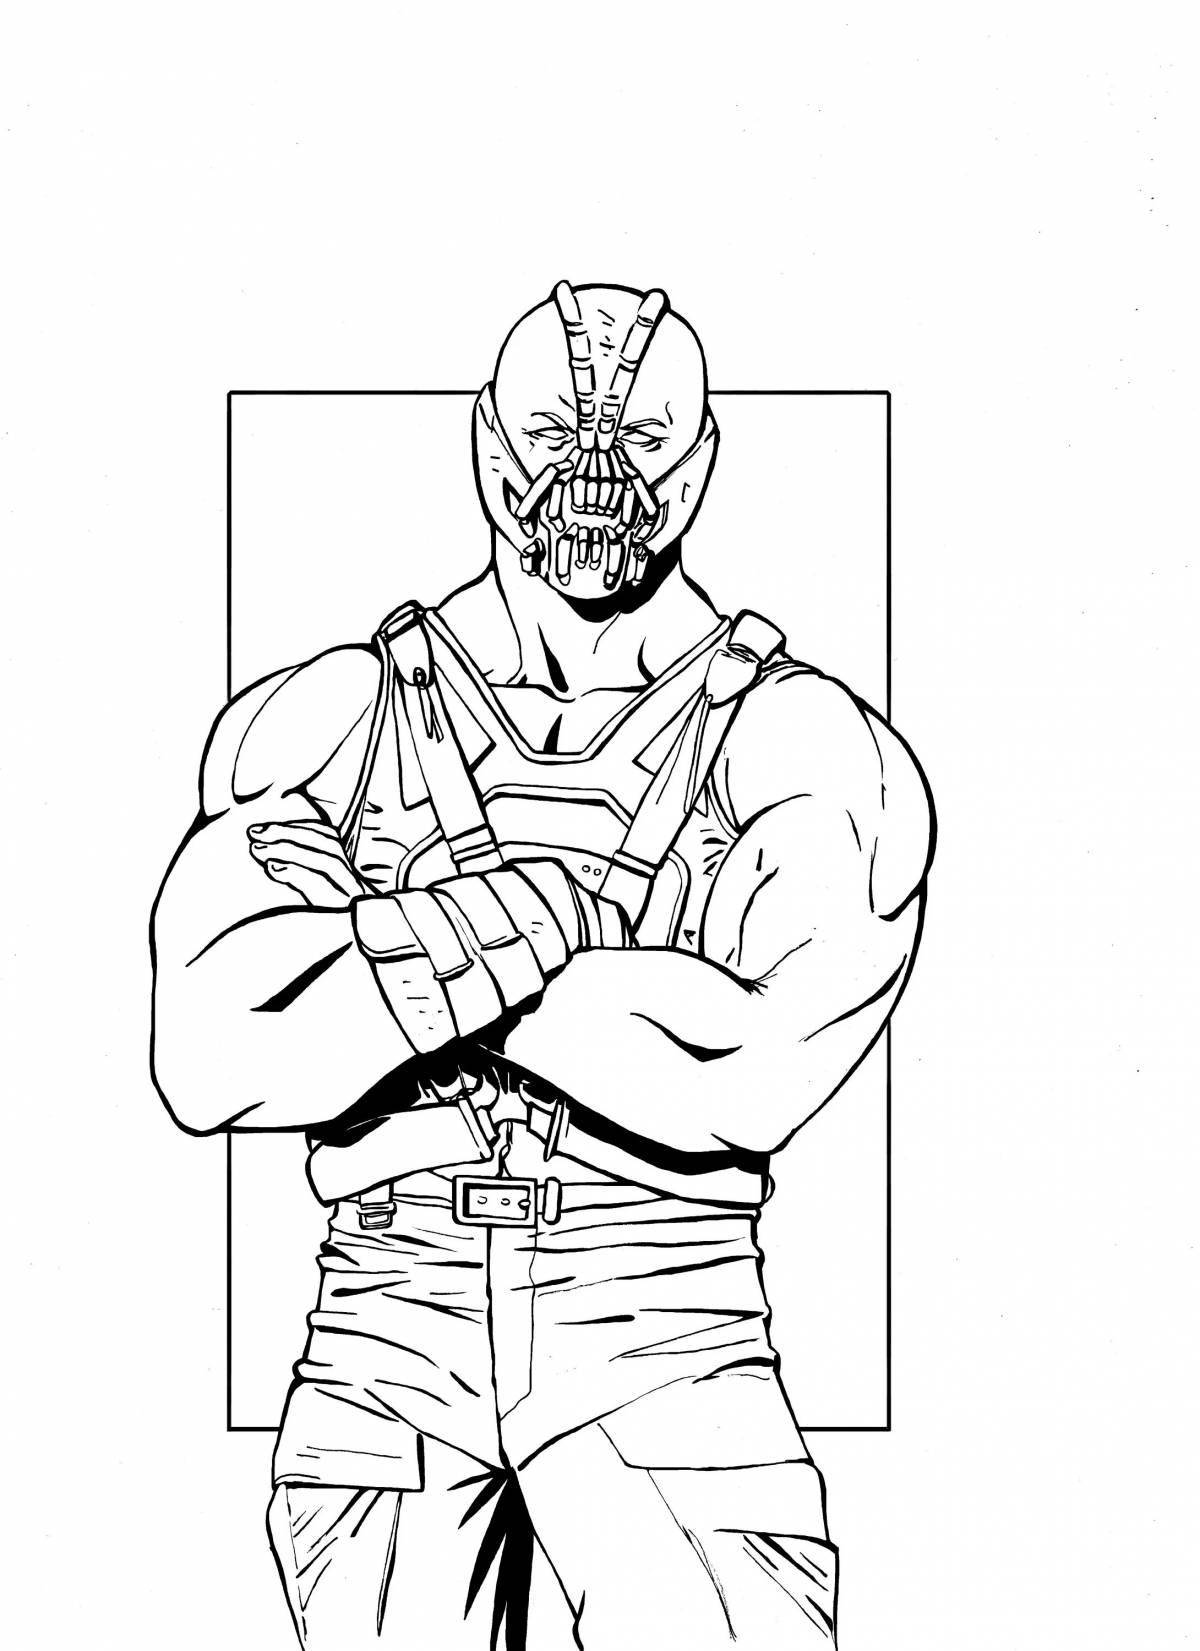 Deluxe Dark Knight coloring page